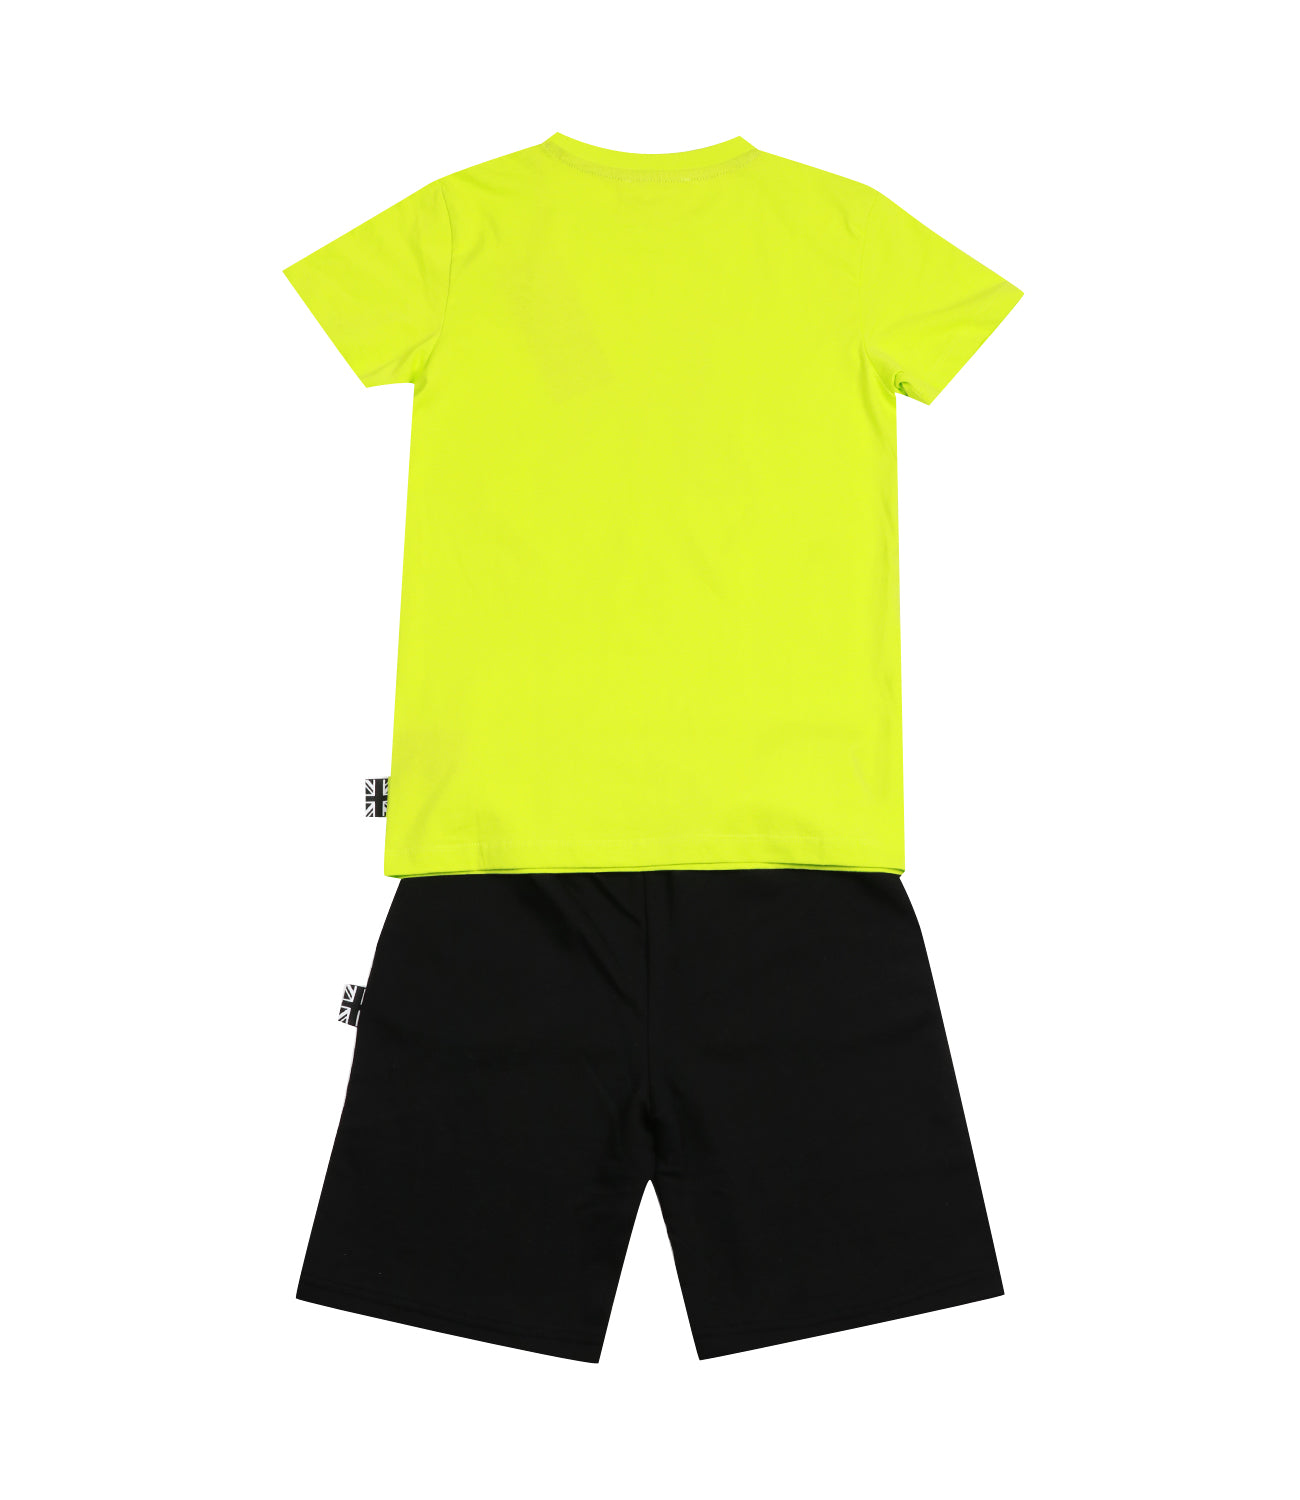 Richmond Kids | Set T-Shirt and Bermuda Shorts Dyed Lime and Black